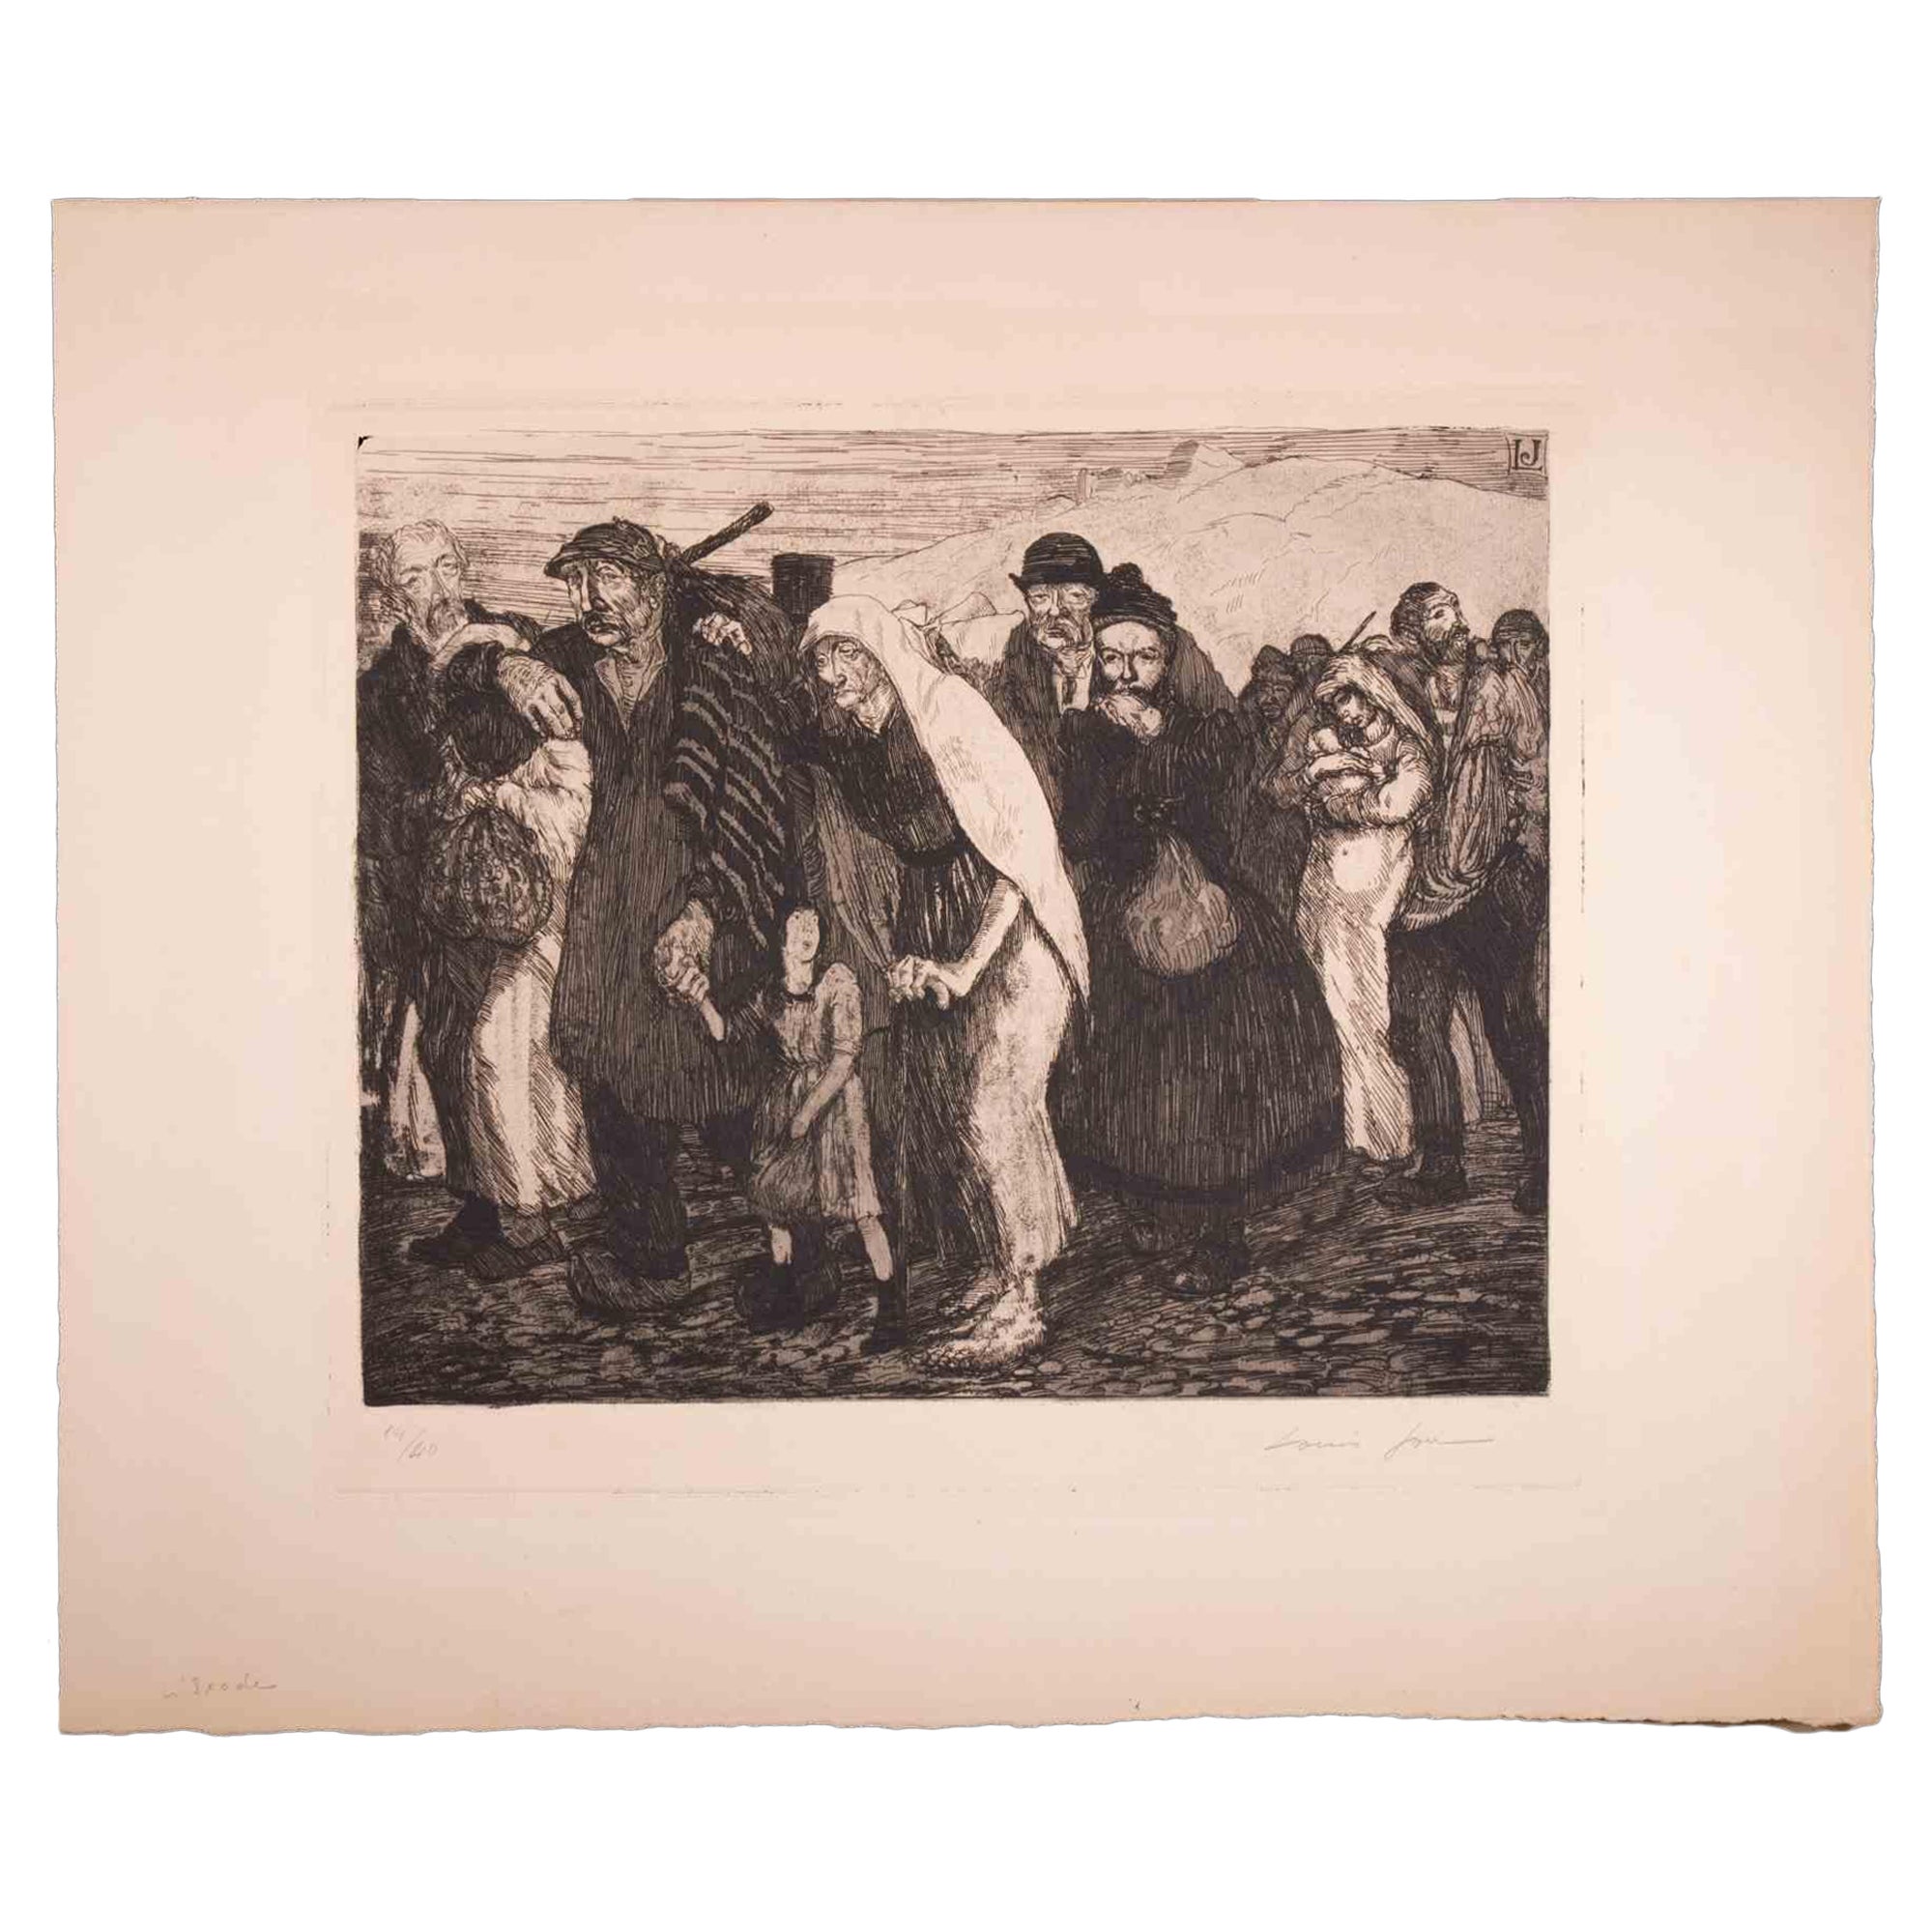 The Suffering Folk - Original Etching by Louis Jou - Early 20th Century